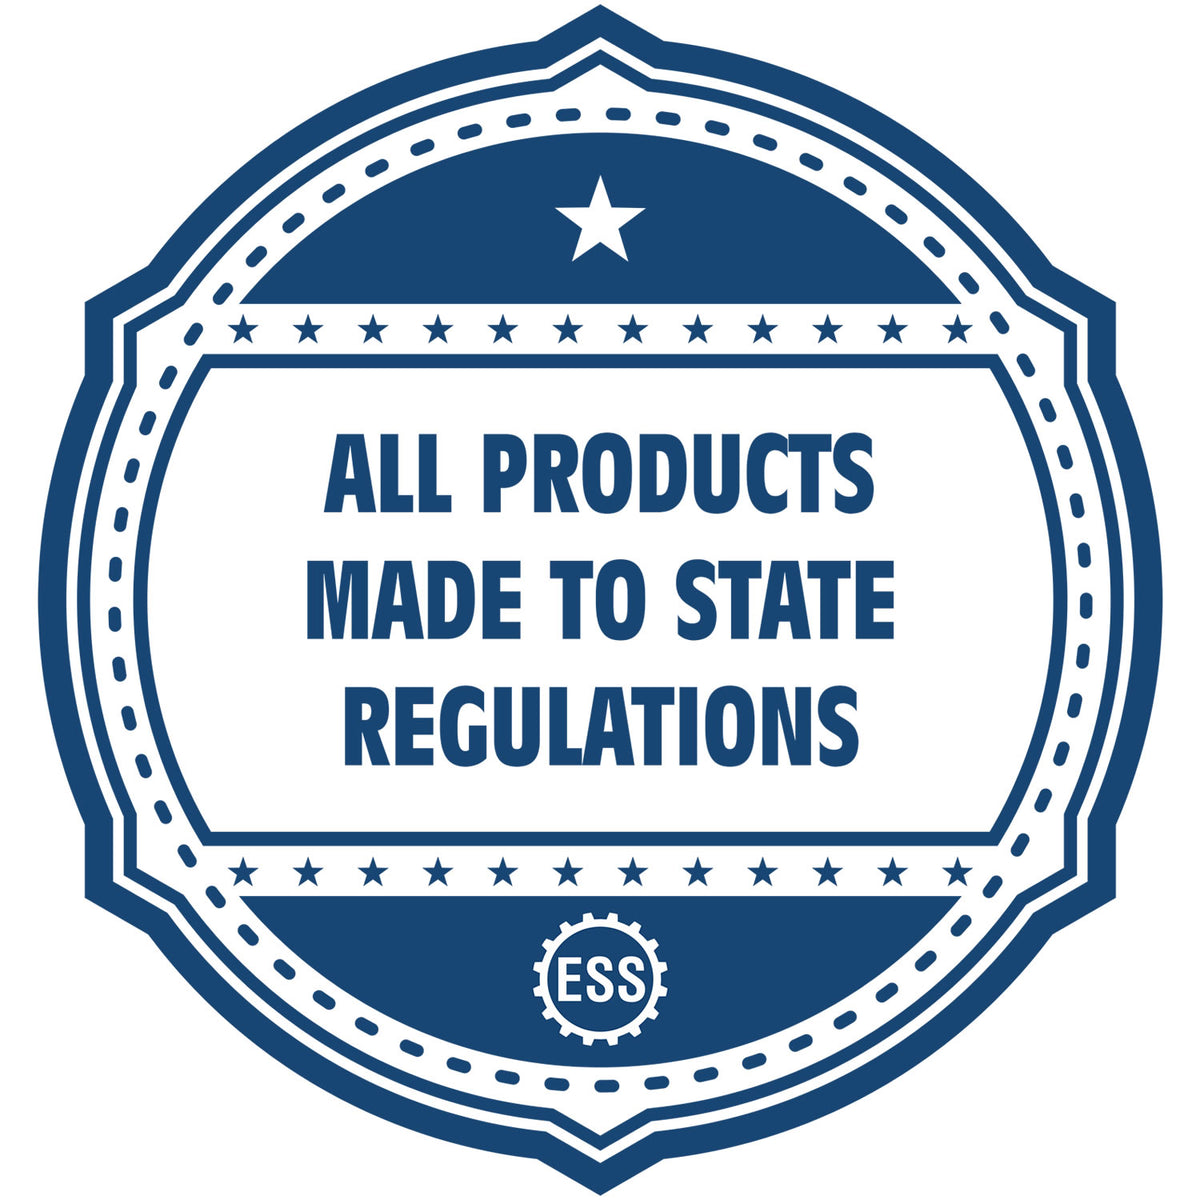 A blue icon or badge for the Hybrid Maine Engineer Seal showing that this product is made in compliance with state regulations.